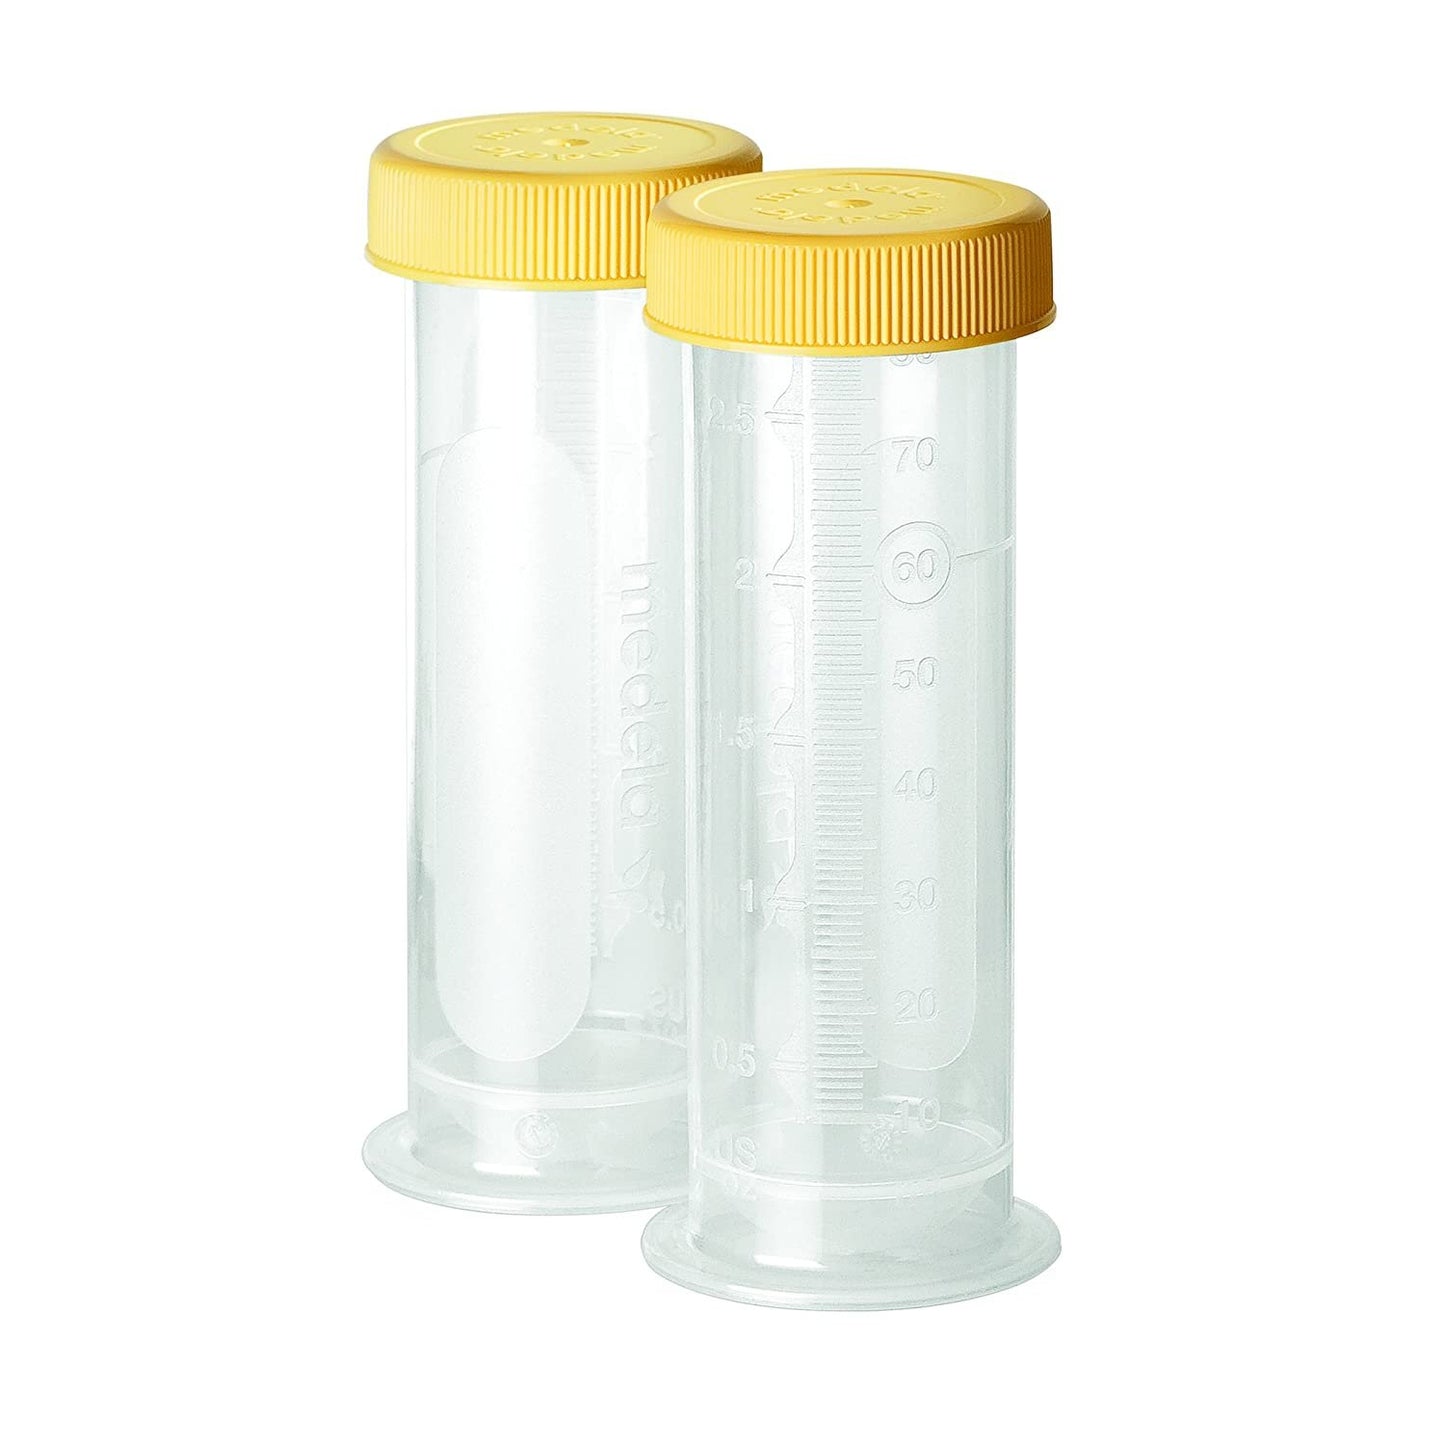 Medela Breast Milk Storage Bottles, 12 Pack of 2.7 Ounce Containers, Leak Proof Lids, Breastmilk Freezer or Refrigerator Storage, Made Without BPA